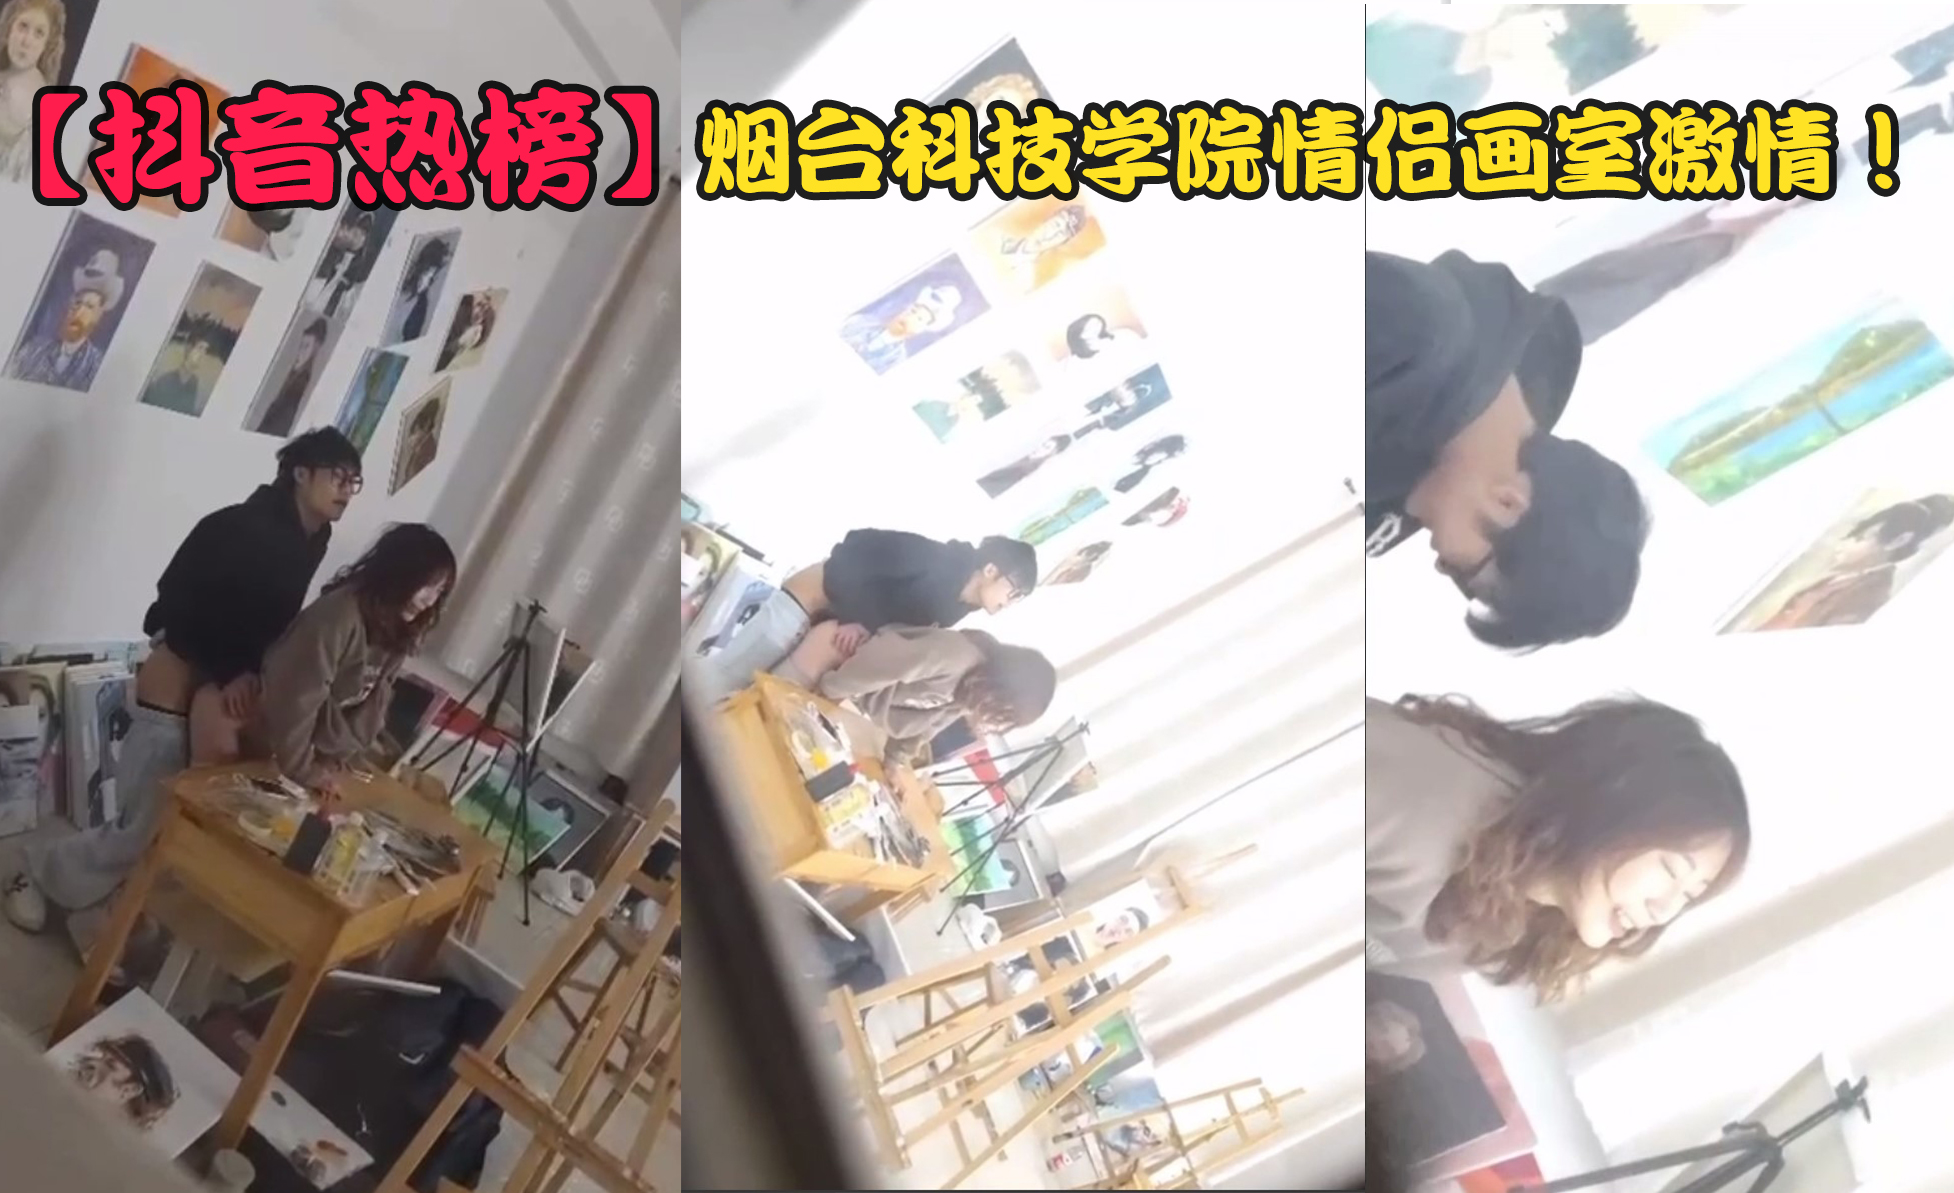 [Jitterbug Hot List] Yantai College of Science and Technology couple passionate lovemaking in the drawing room was secretly photographed! The hero is brave and invincible, the heroine weeps and wipes herself off, and the seats are a mess!